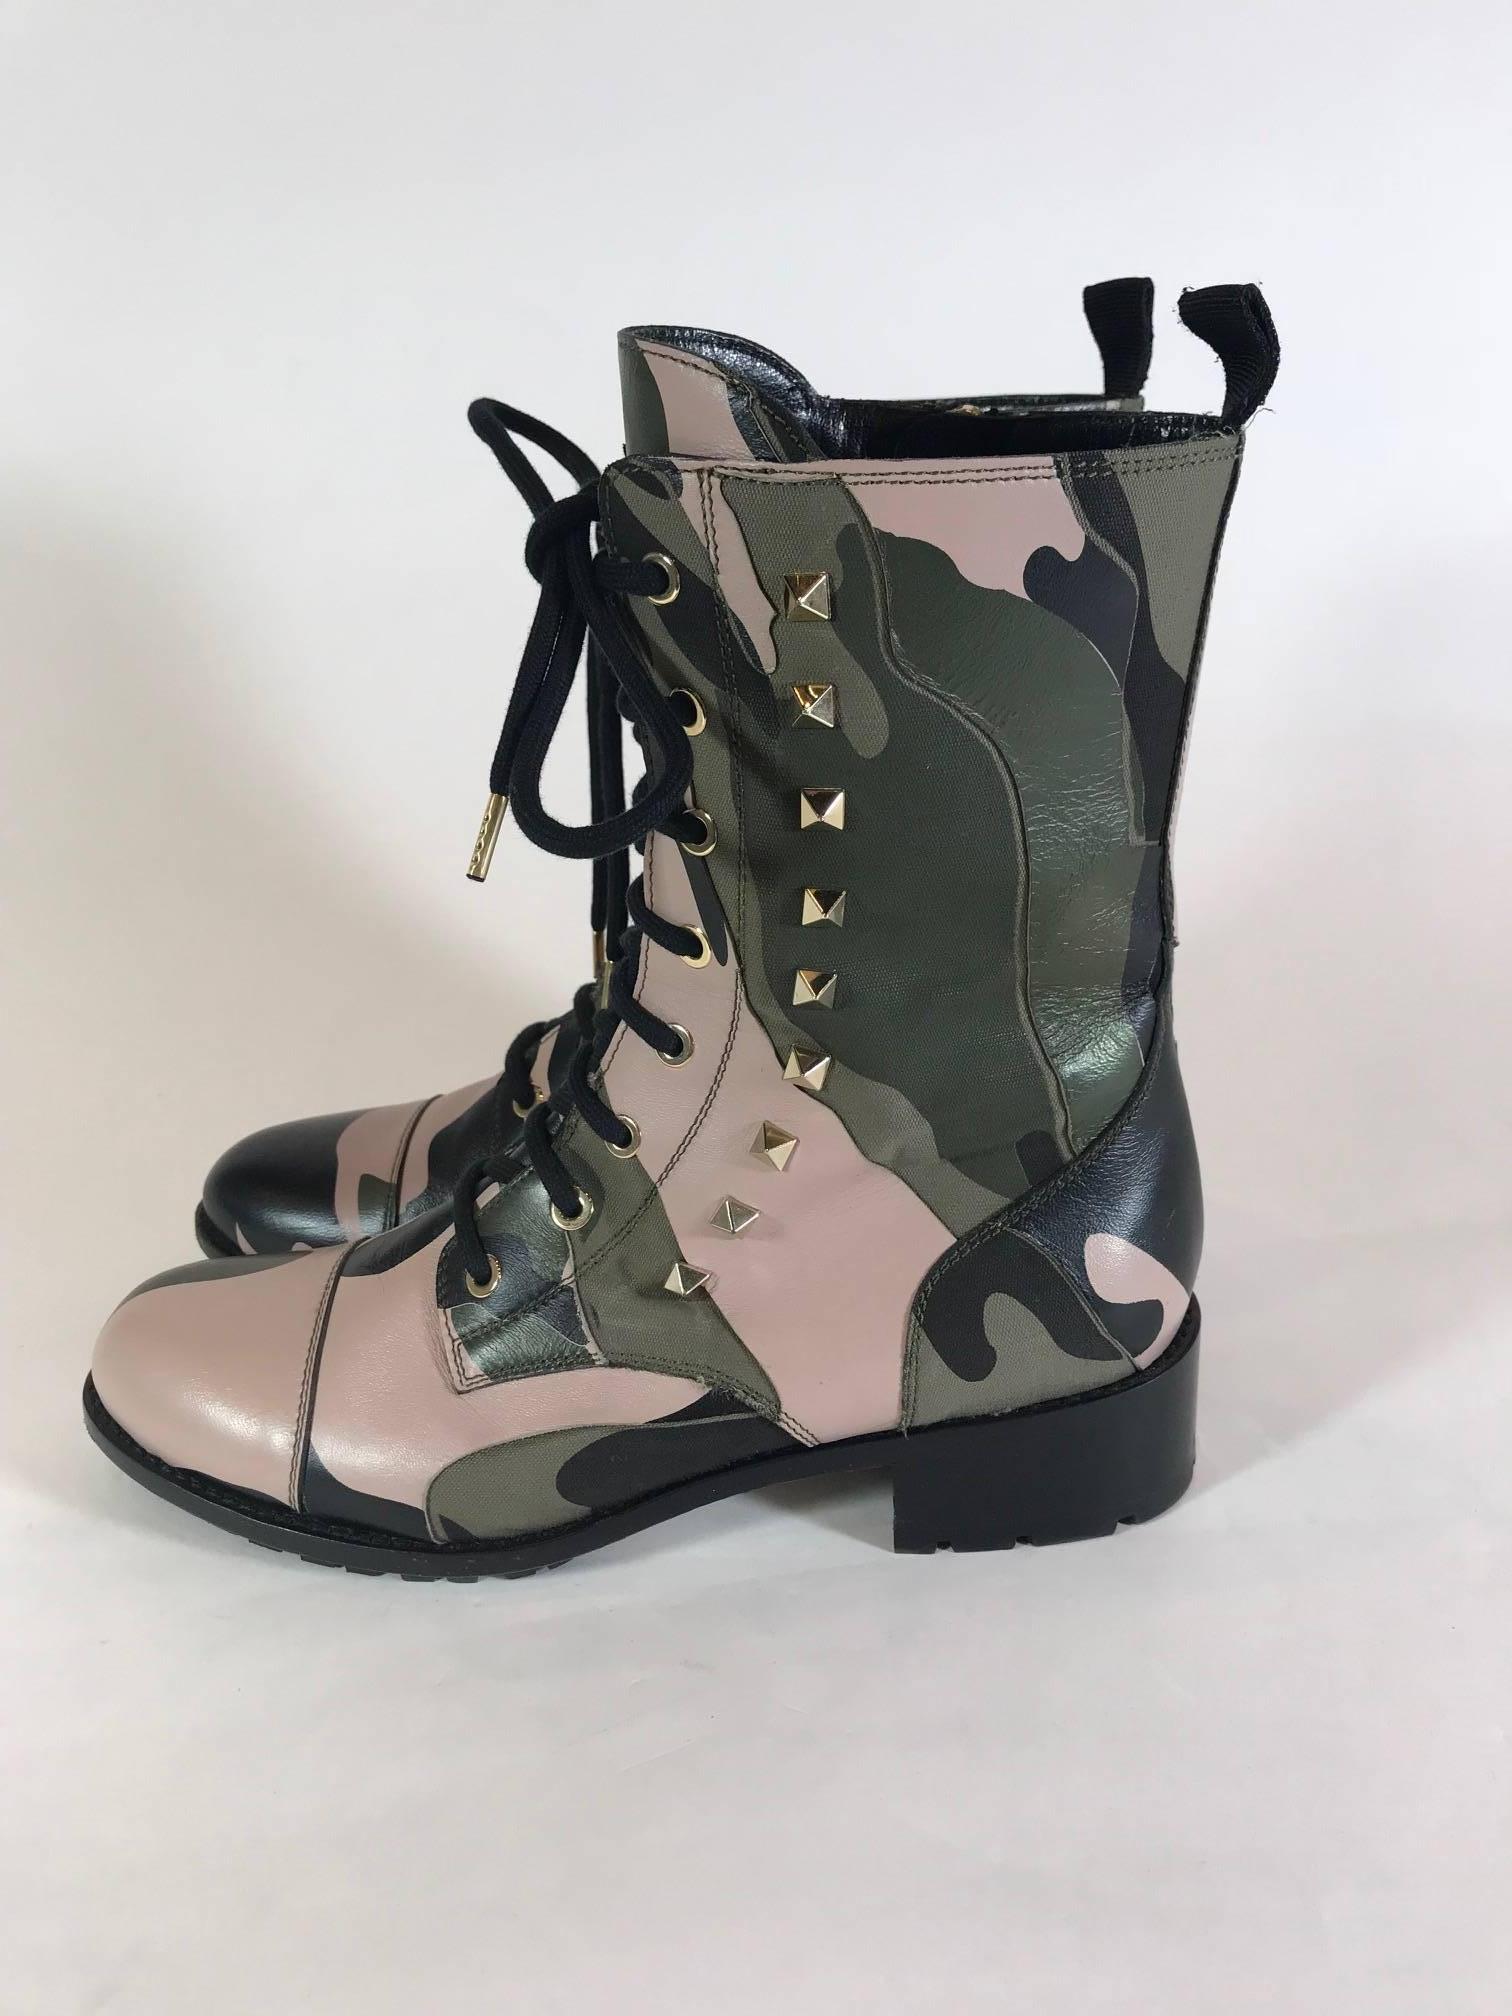 Valentino Rockstud Army Camo Leather Canvas Combat In Excellent Condition For Sale In Roslyn, NY